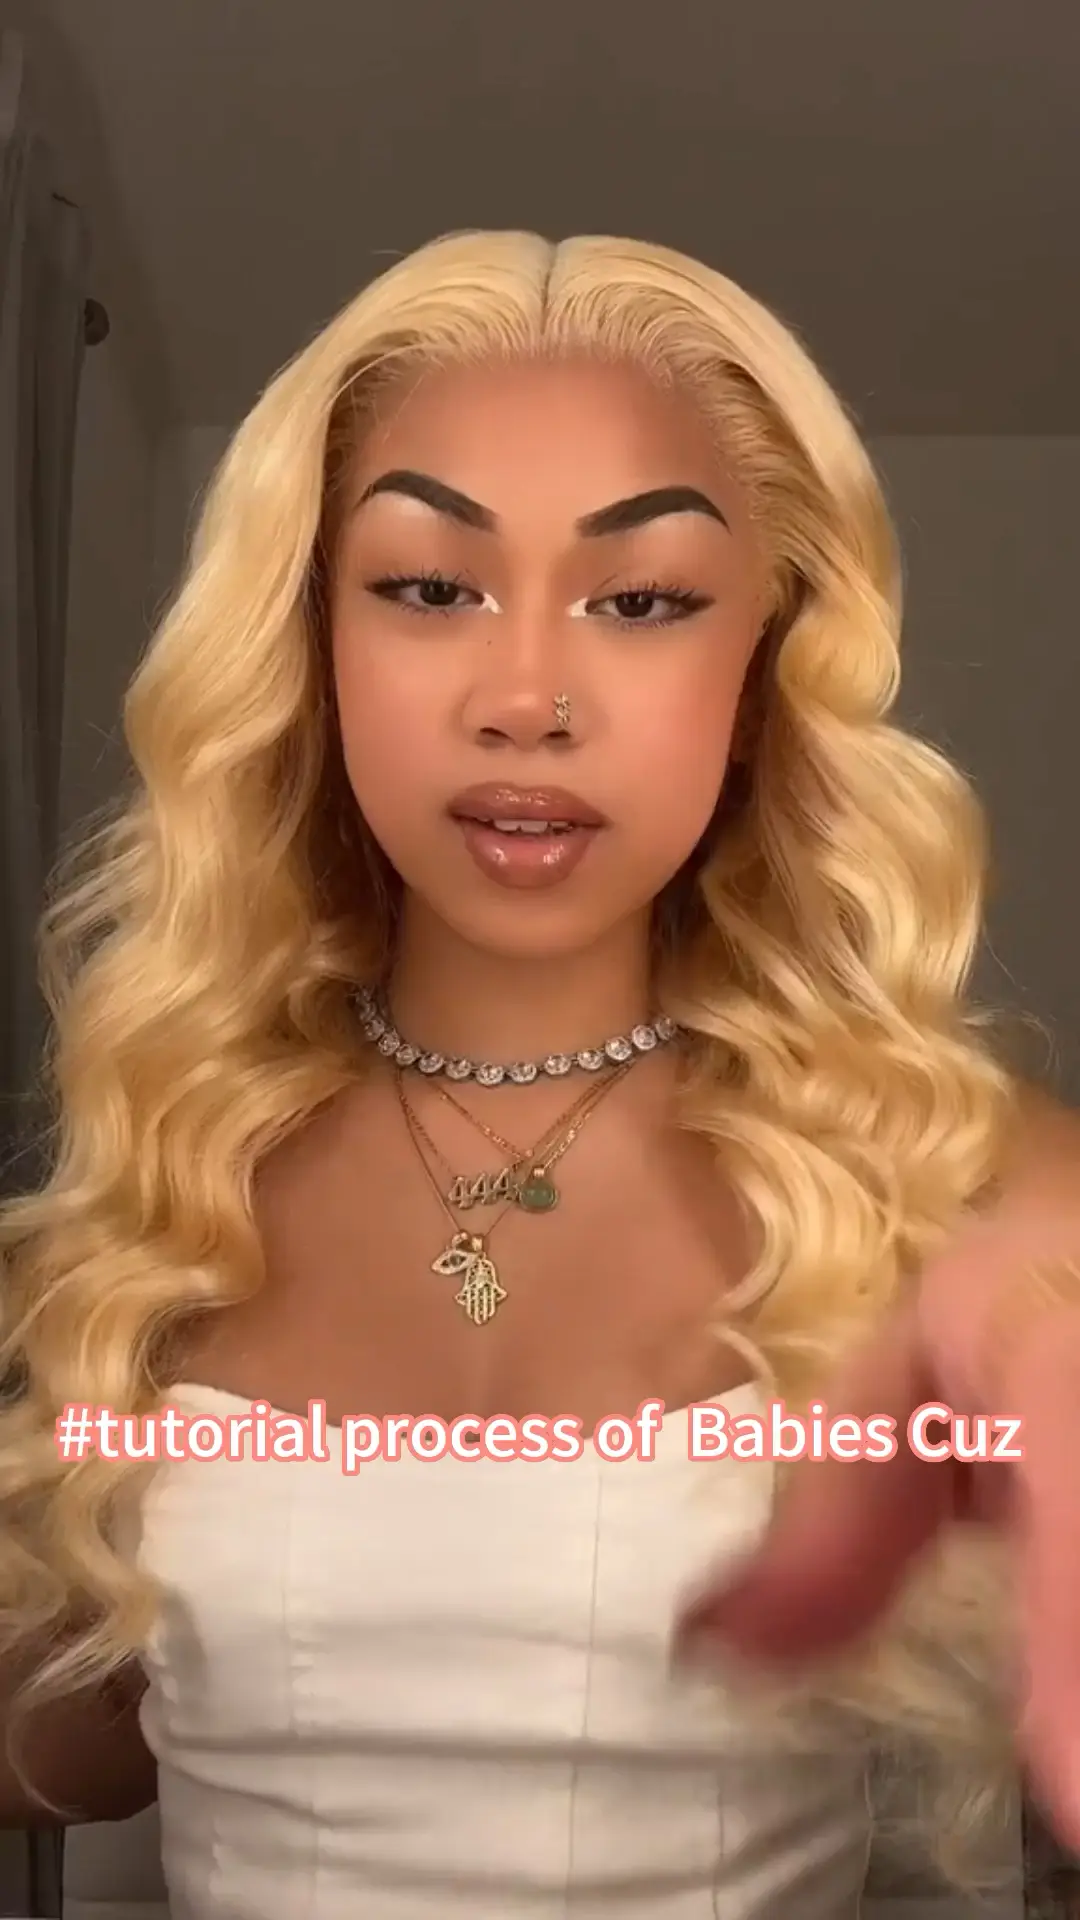 Wig Installs, Video published by AsakebyRoyalty